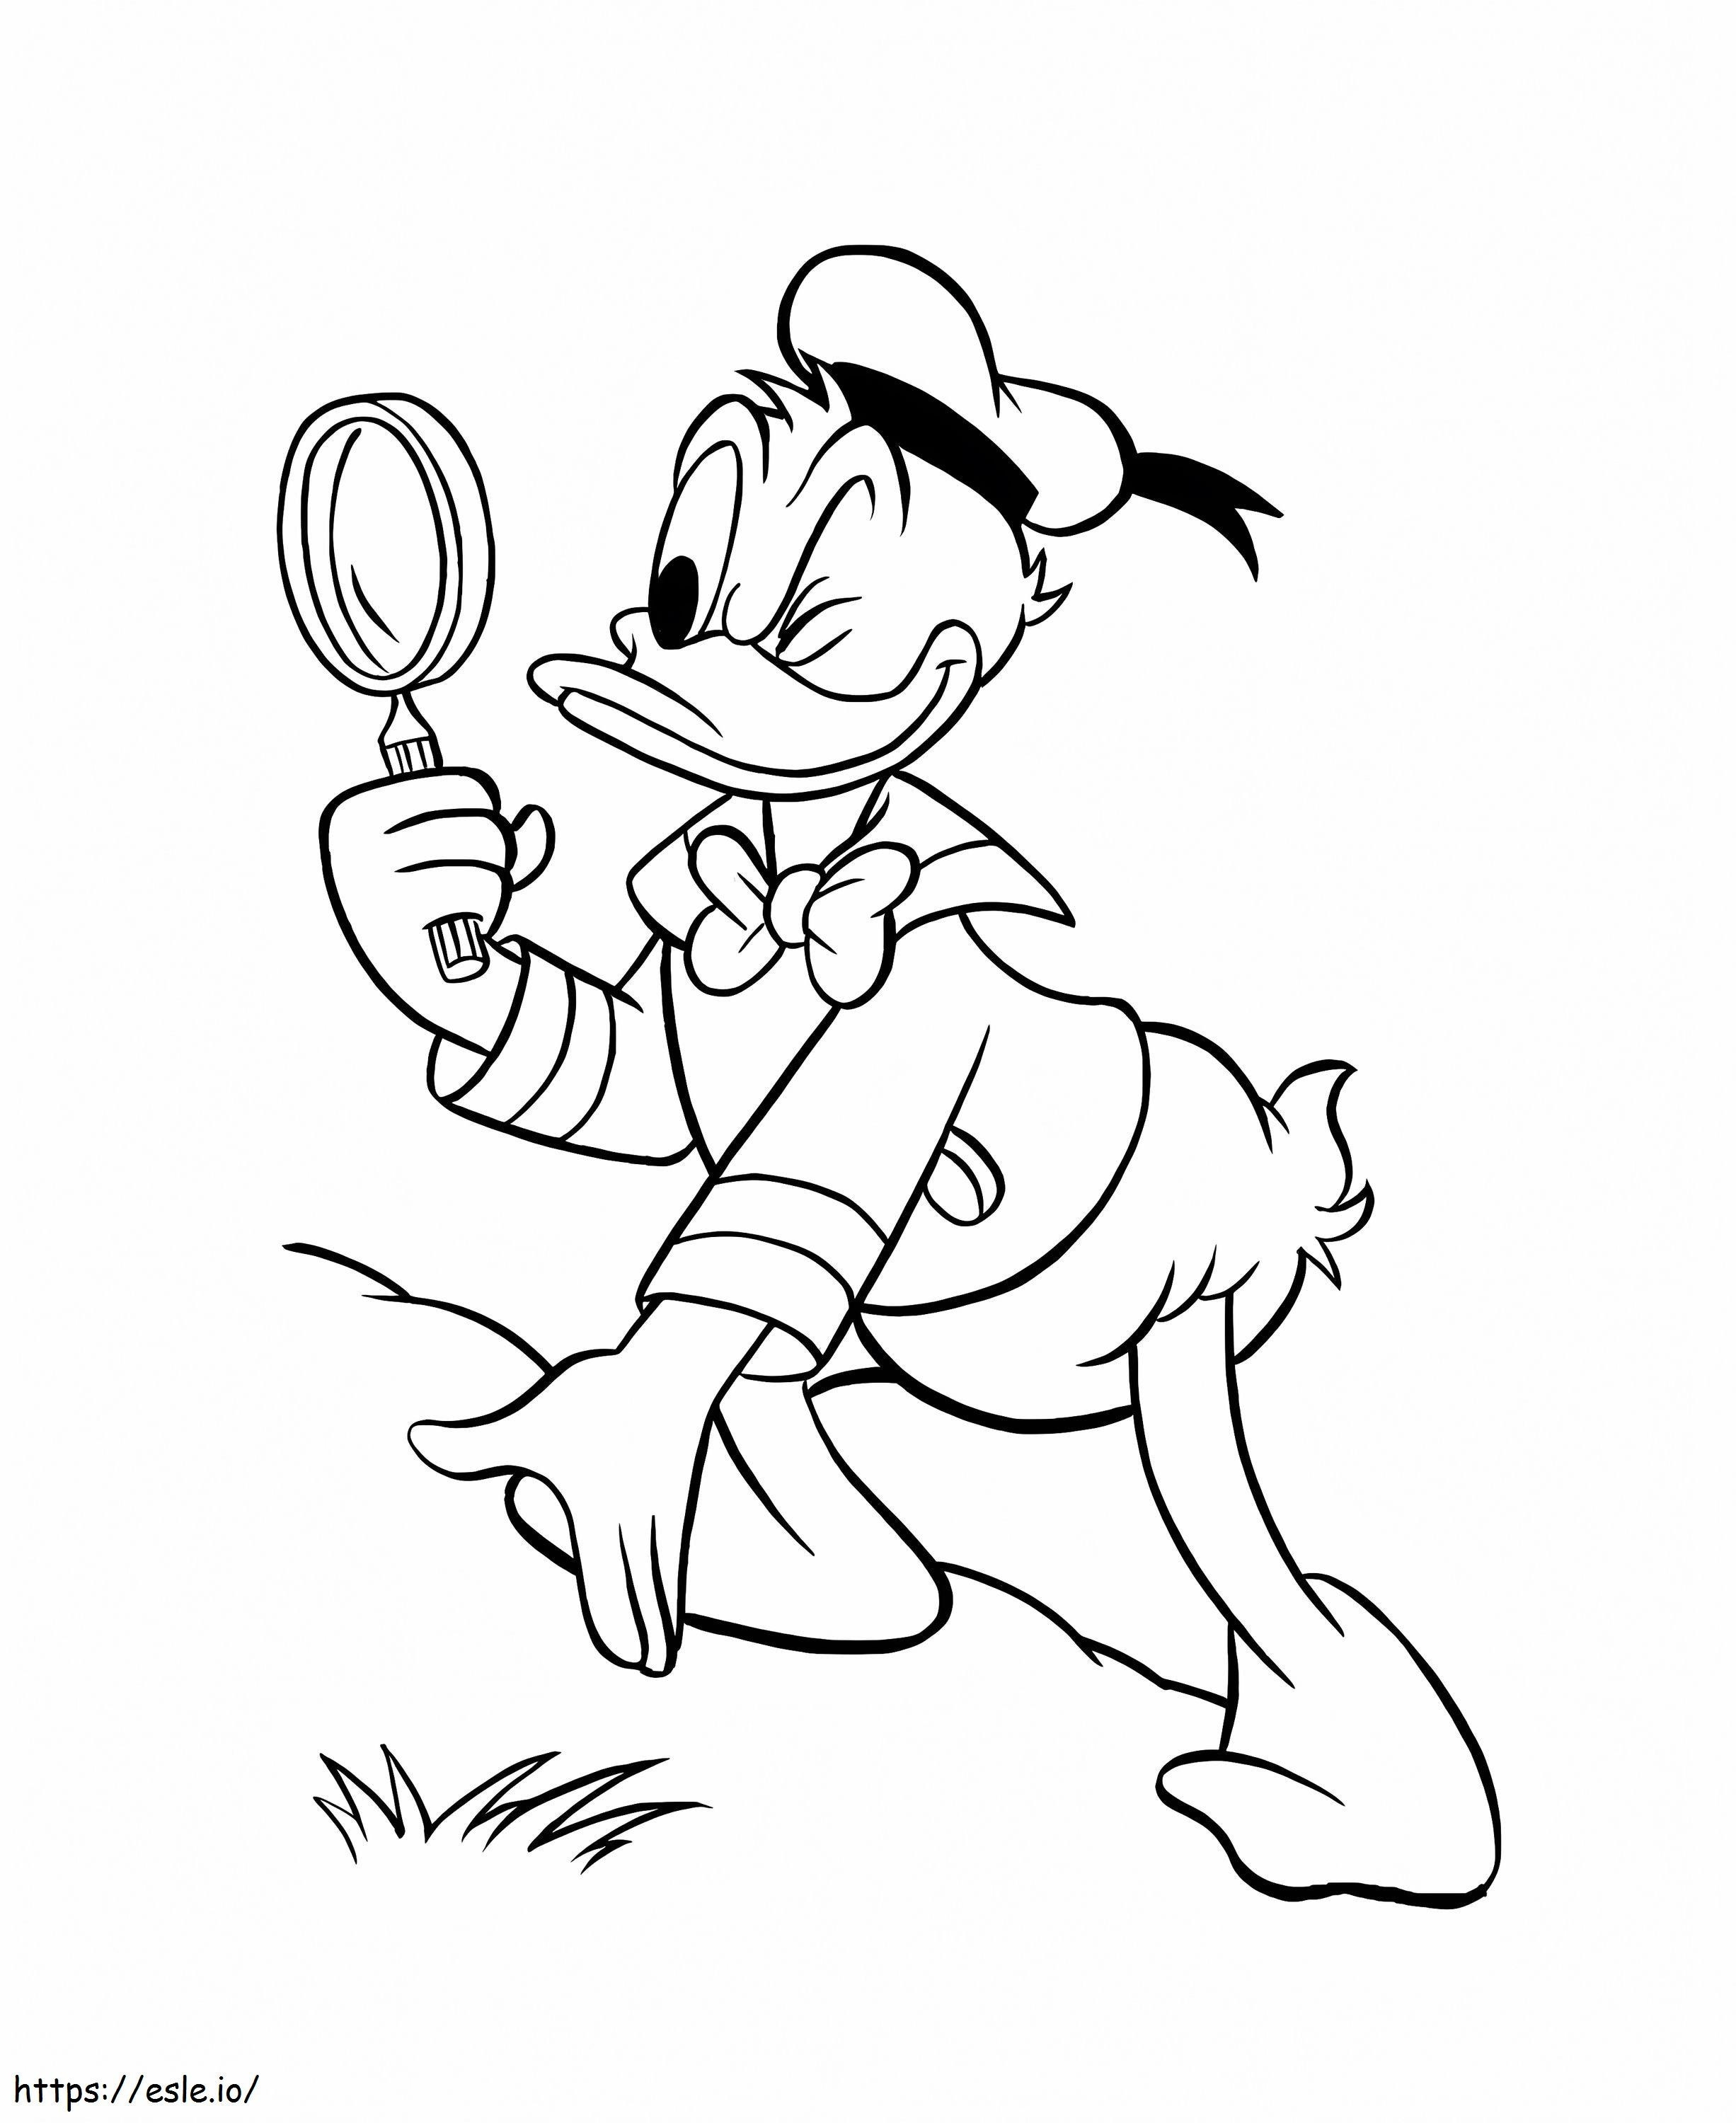 Donald Duck Looking Through A Magnifying Glass coloring page